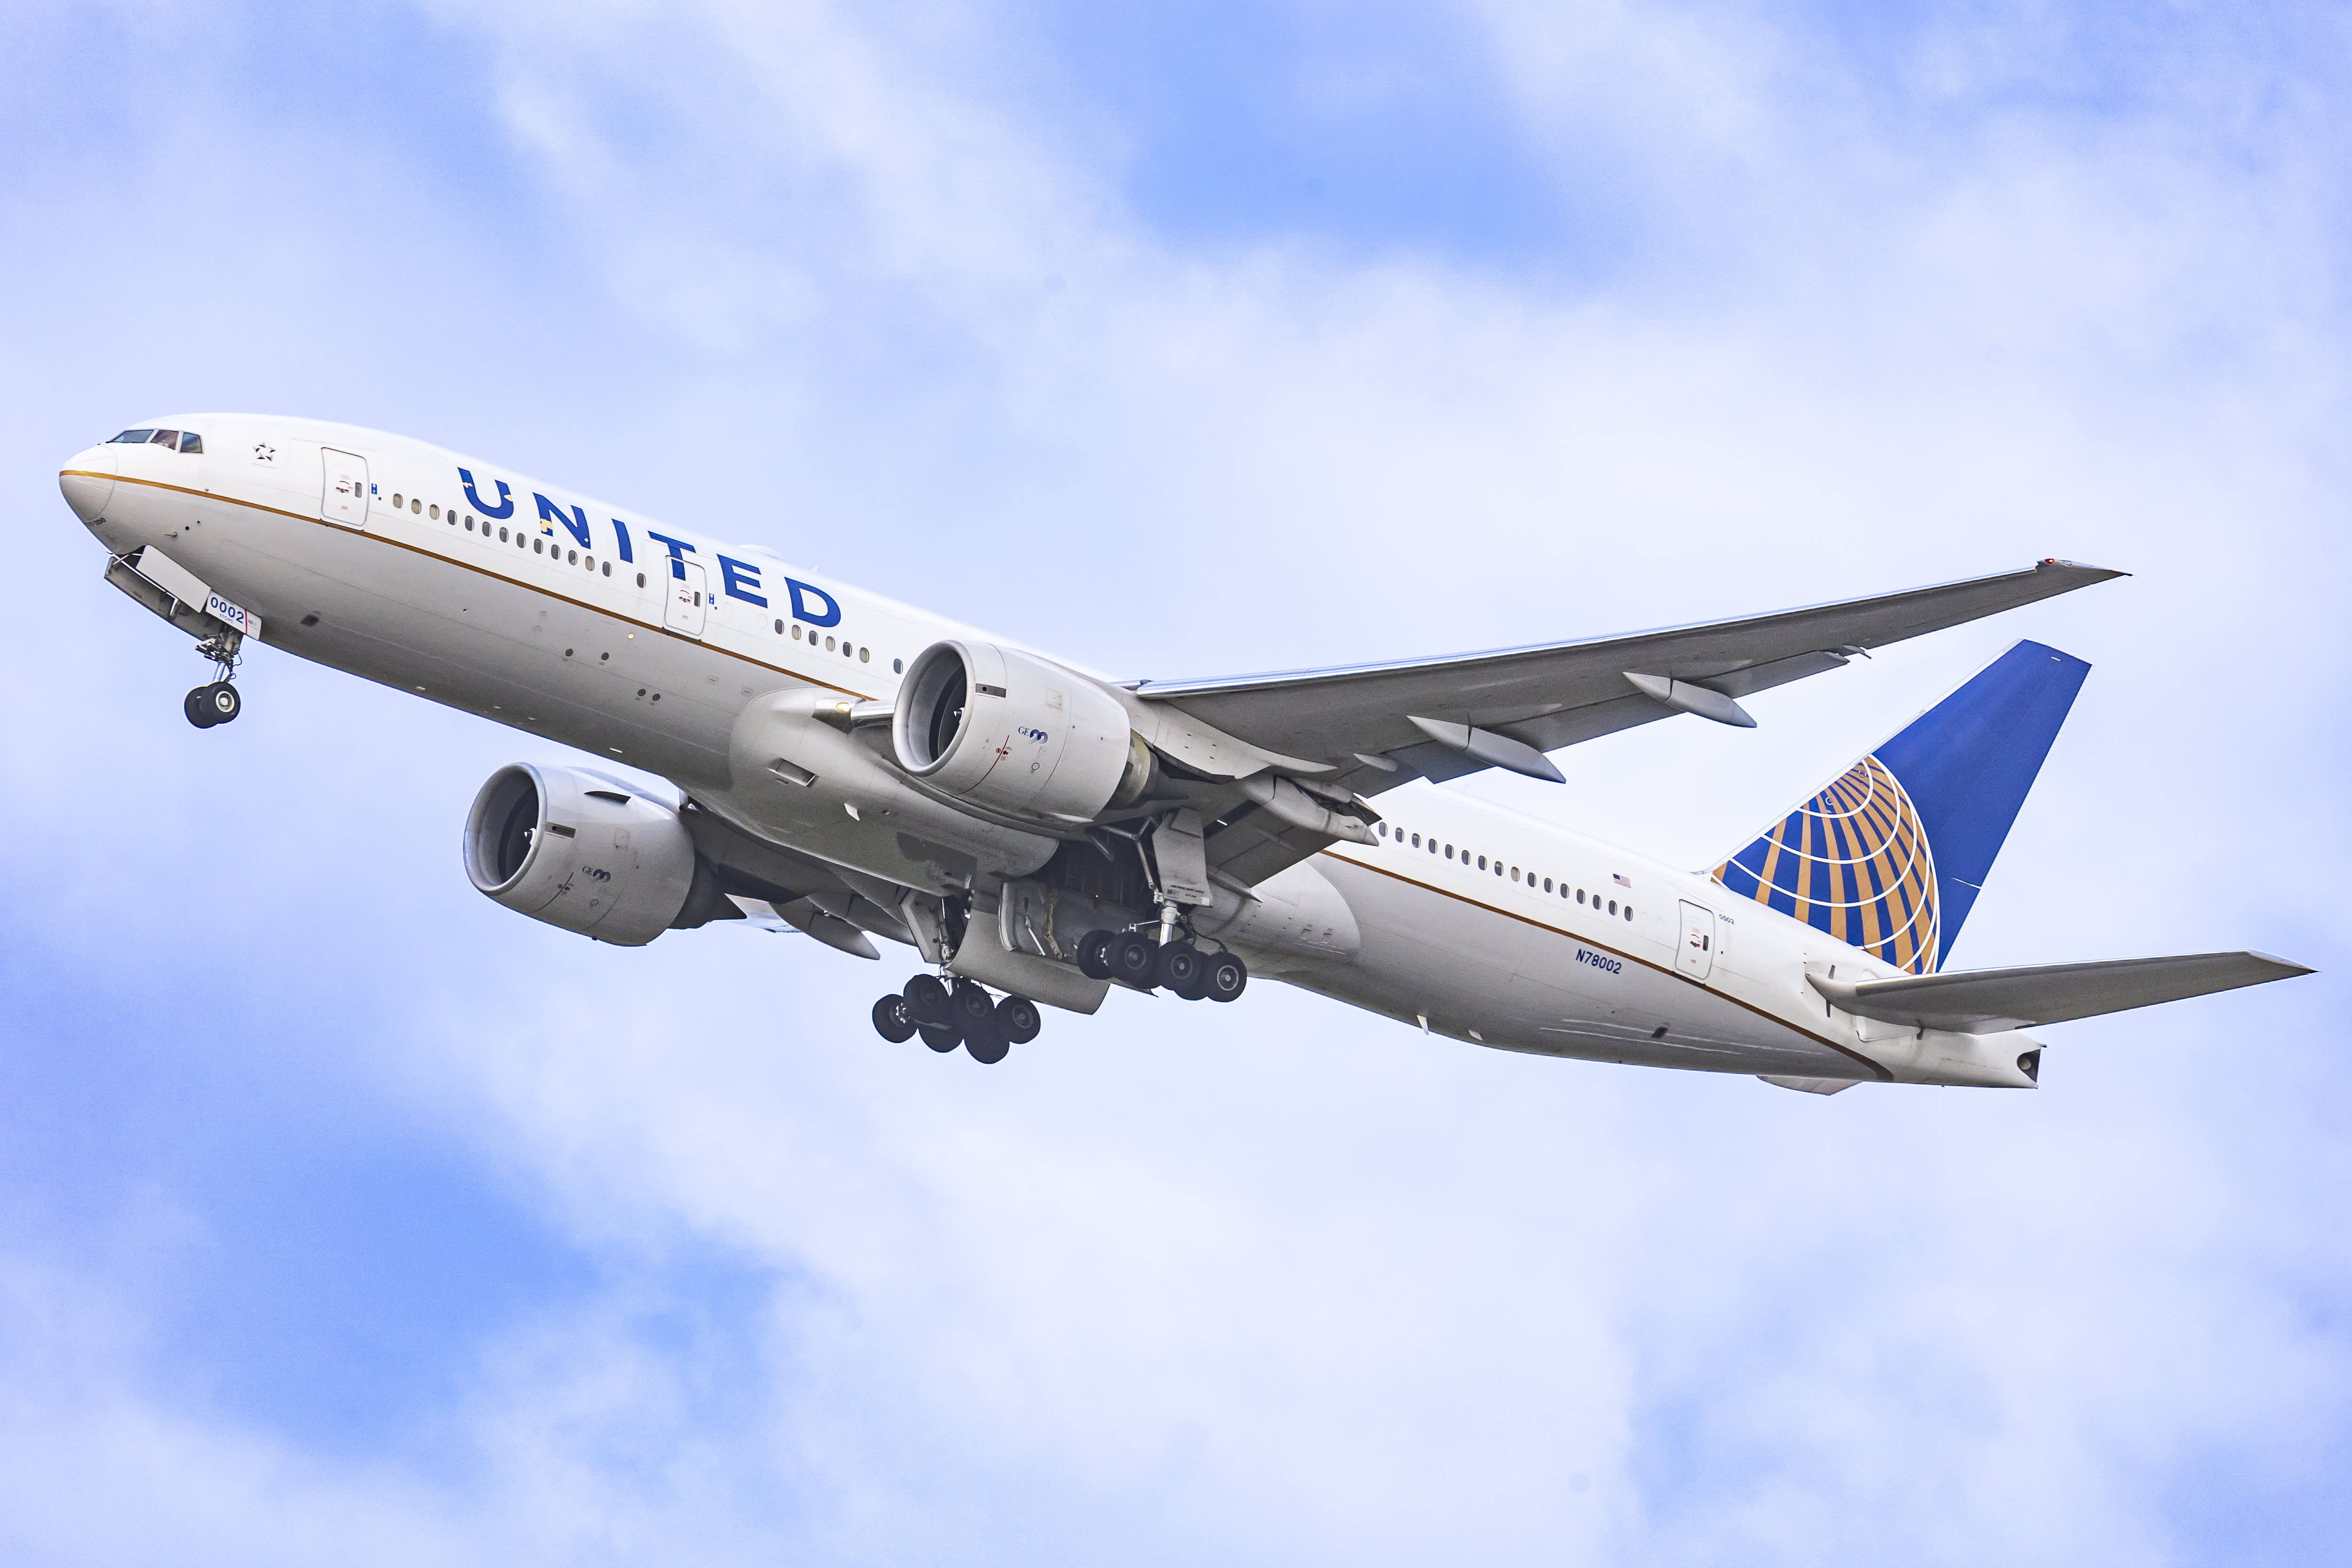 Barclays upgrades United Airlines, sees stock surging more than 50%